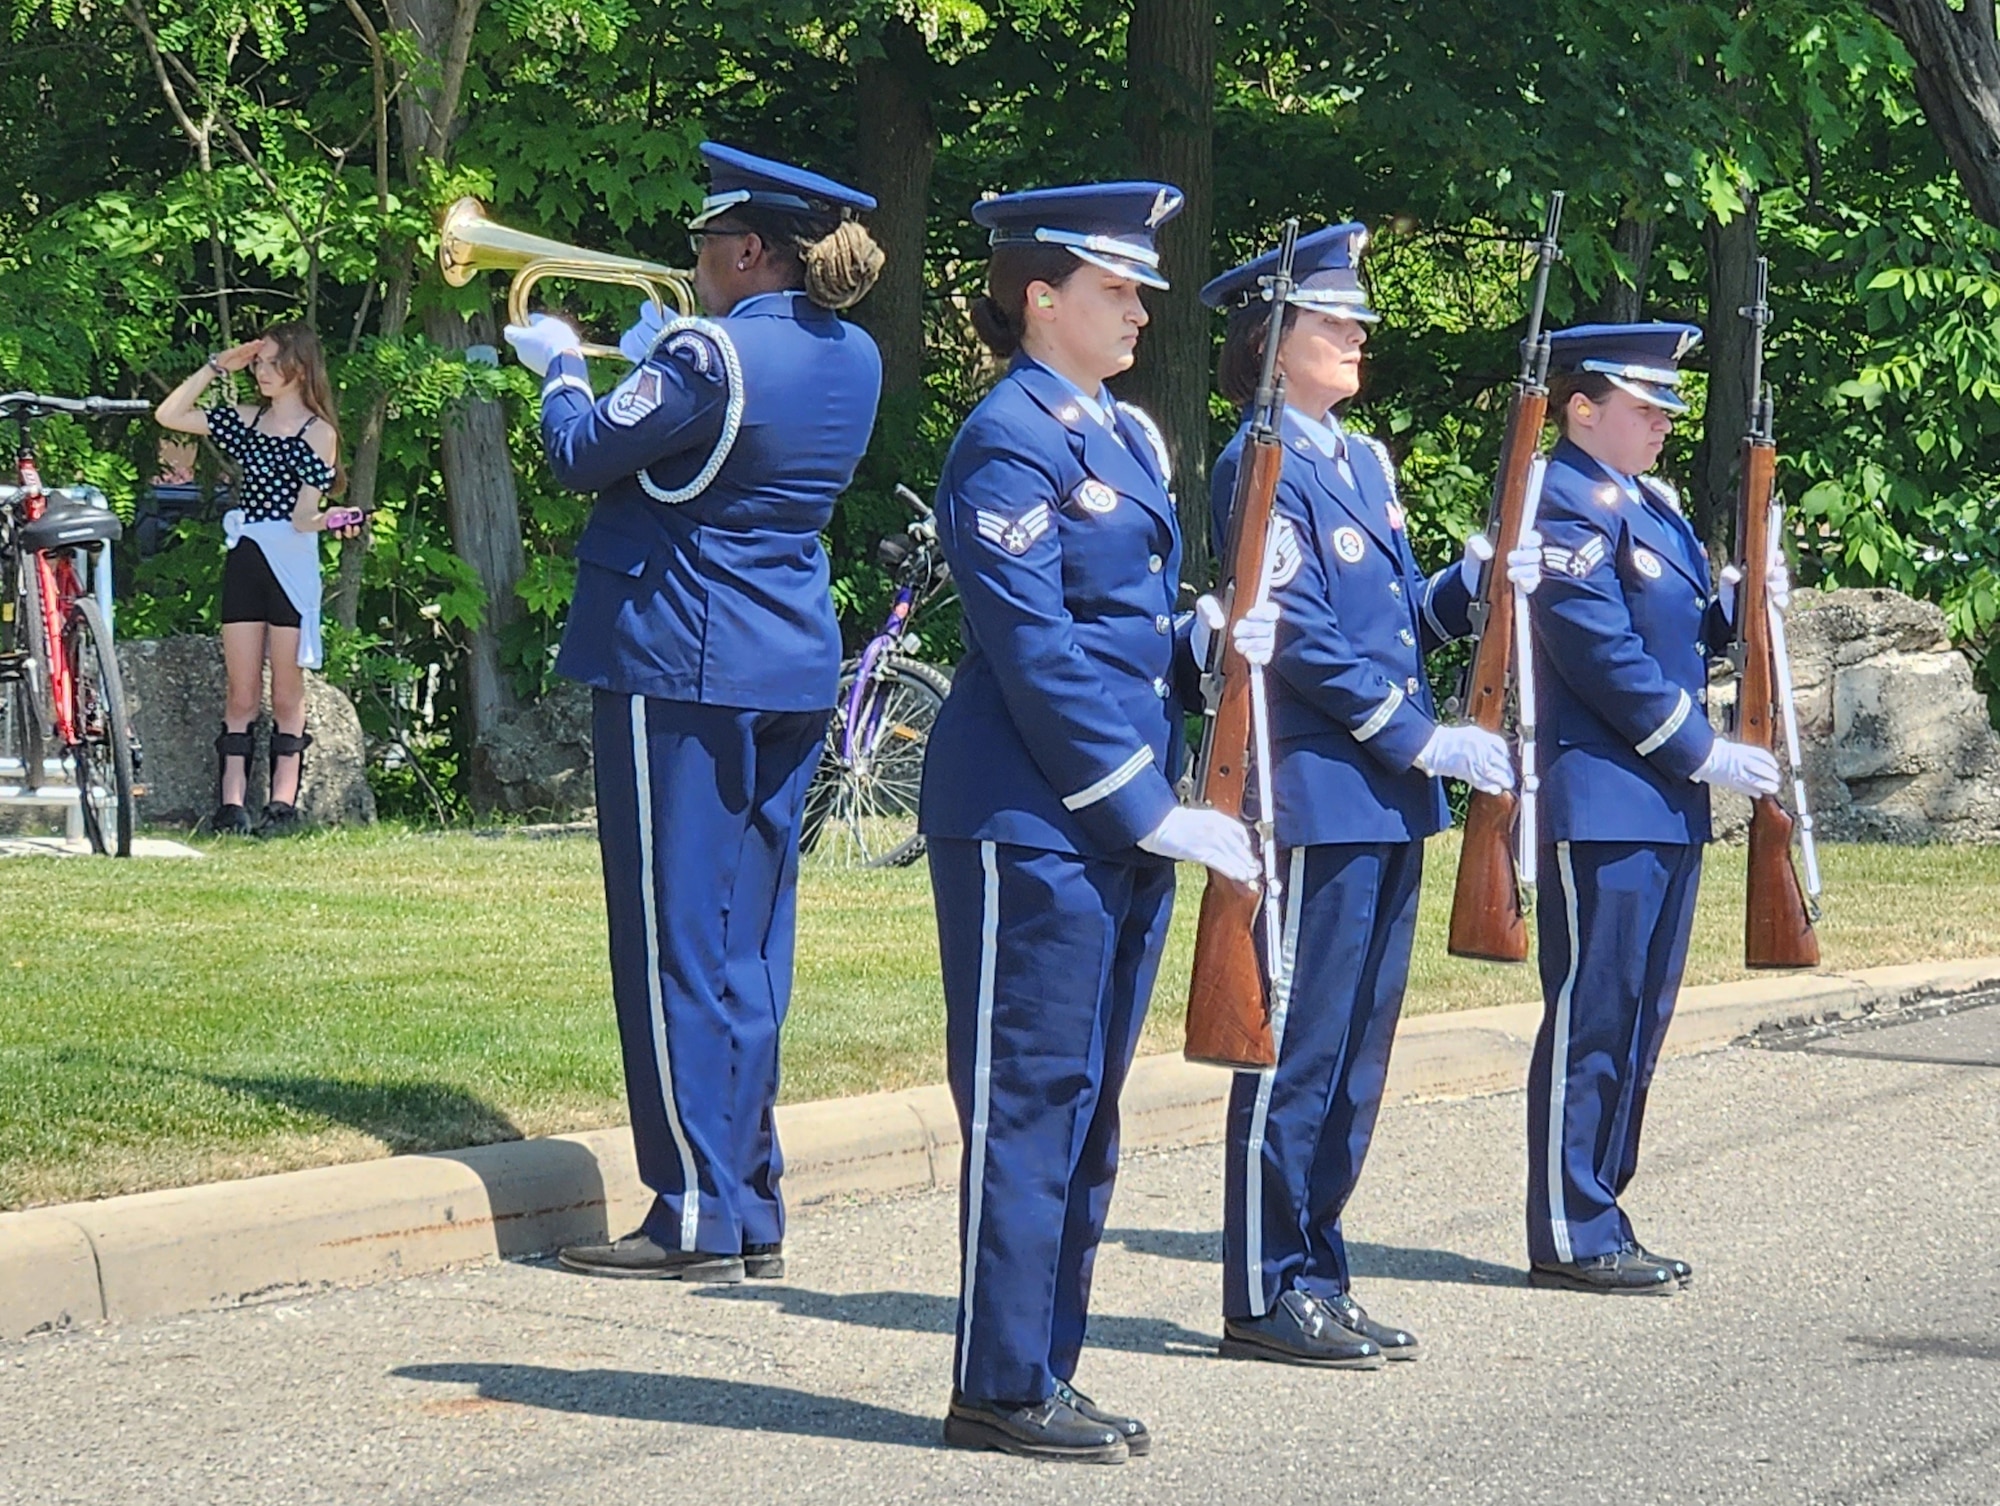 Members of the 910th Airlift Wing Base Honor Guard stand at attention after conducting a rifle salute while a bugle rendition of ‘Taps’ is performed at the Cortland Memorial Day ceremony at the veterans memorial here, May 29, 2023. Several 910th Airmen participated in the ceremony which focused on honoring the memory of and never forgetting the more than one million American service members who have paid the ultimate sacrifice of giving their lives in defense of the United States of America. The wing’s strong representation at the ceremony was an example of the partnership that both the 910th and community leaders hoped to achieve as a result of Cortland City Council’s resolution, issued Feb. 21, 2023, declaring the community as a ‘Sister City’ to YARS. U.S. Air Force photo by Senior Master Sgt. Bob Barko Jr.